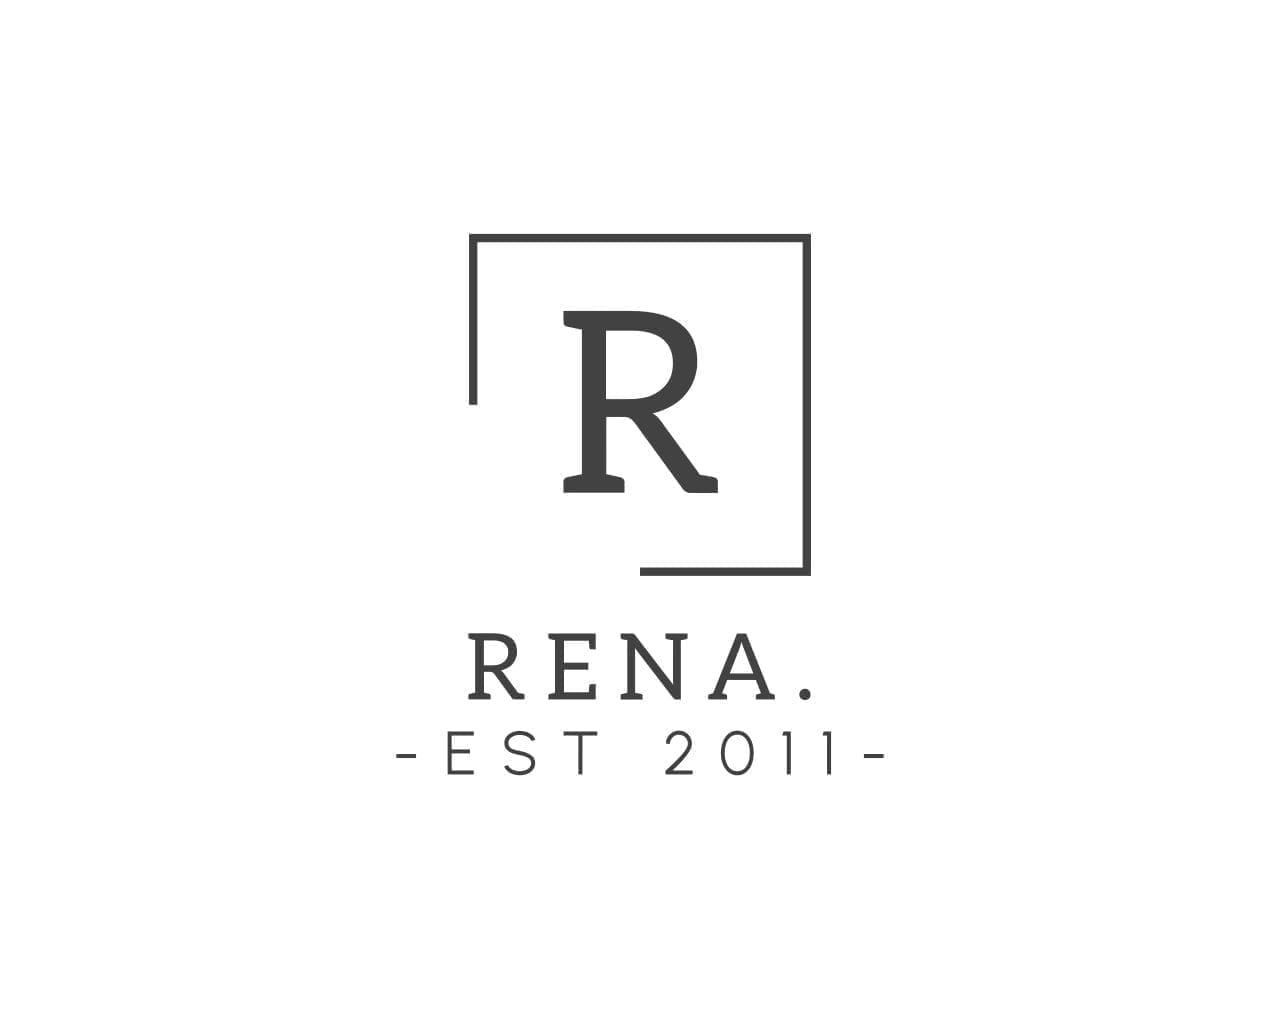 A logo of the letter r with an initial.